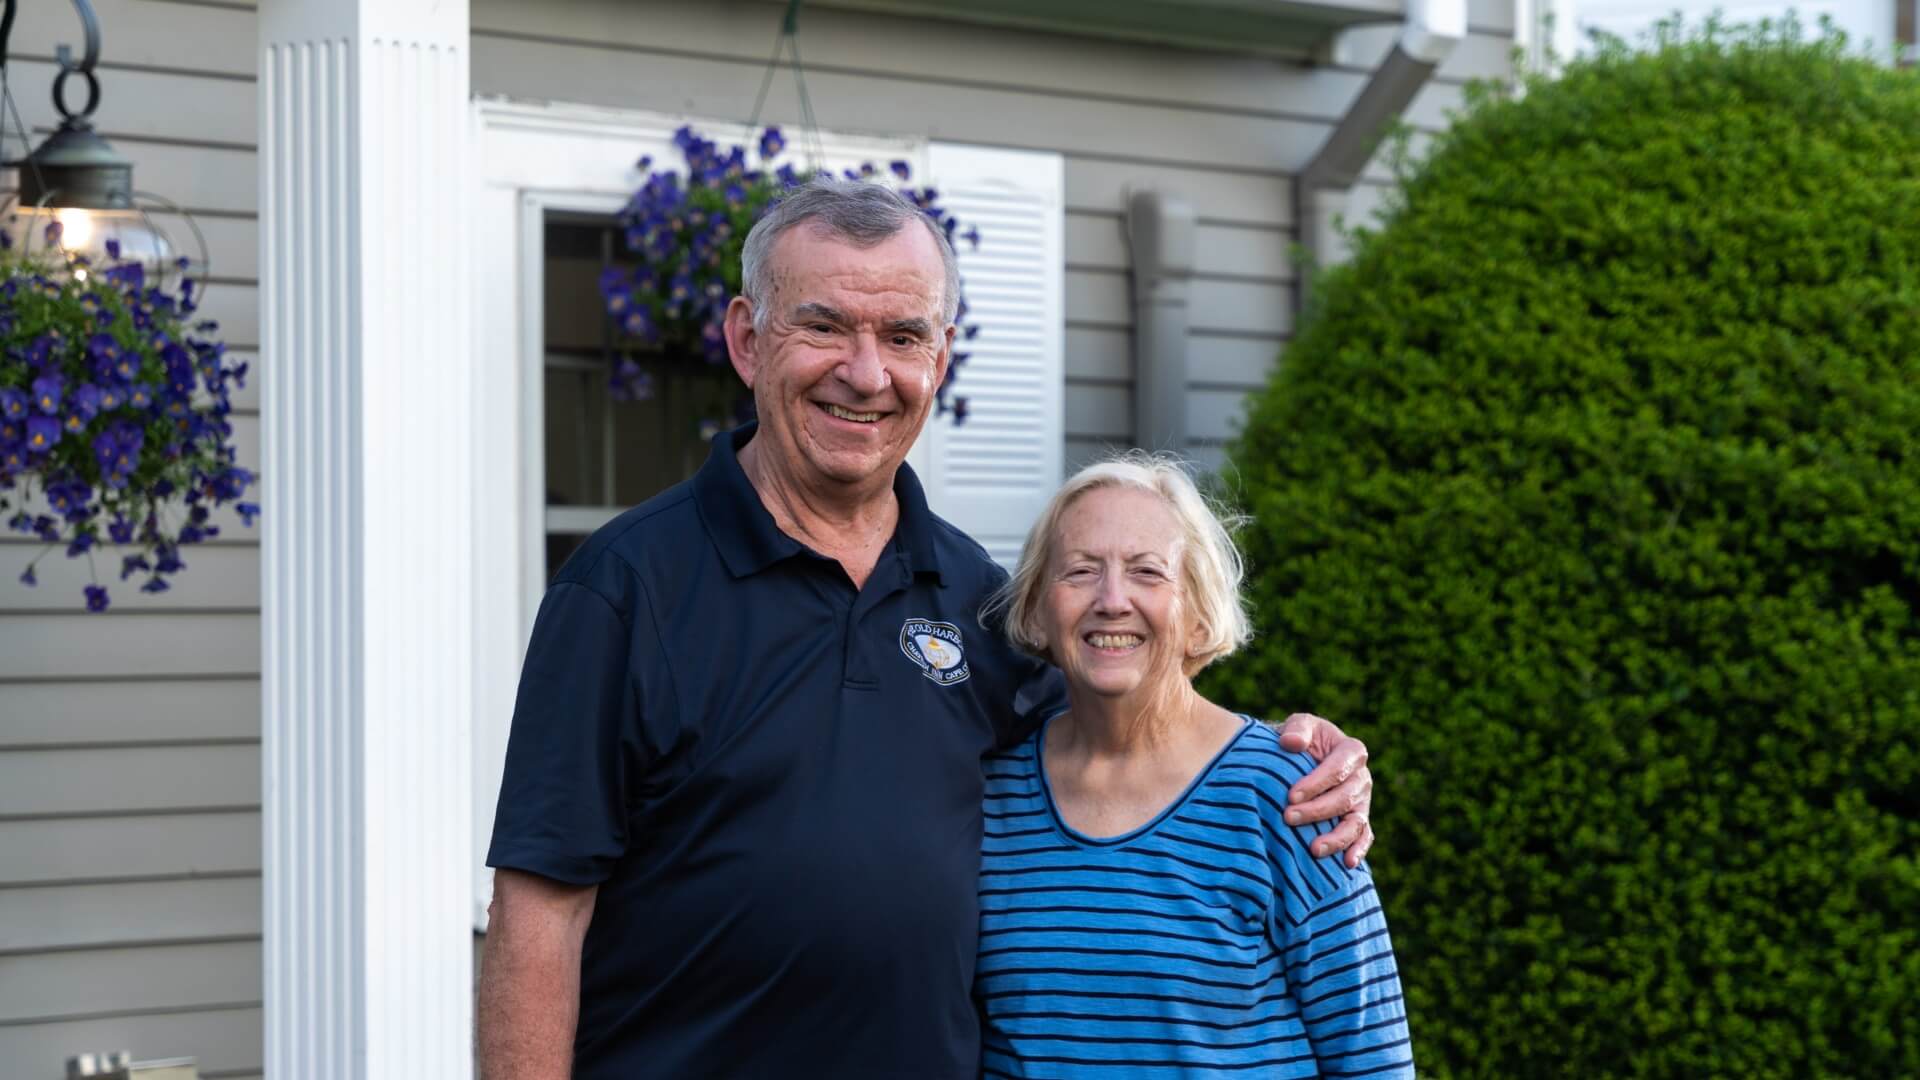 A man and woman standing together smiling in front of a home with flowers and green bushes